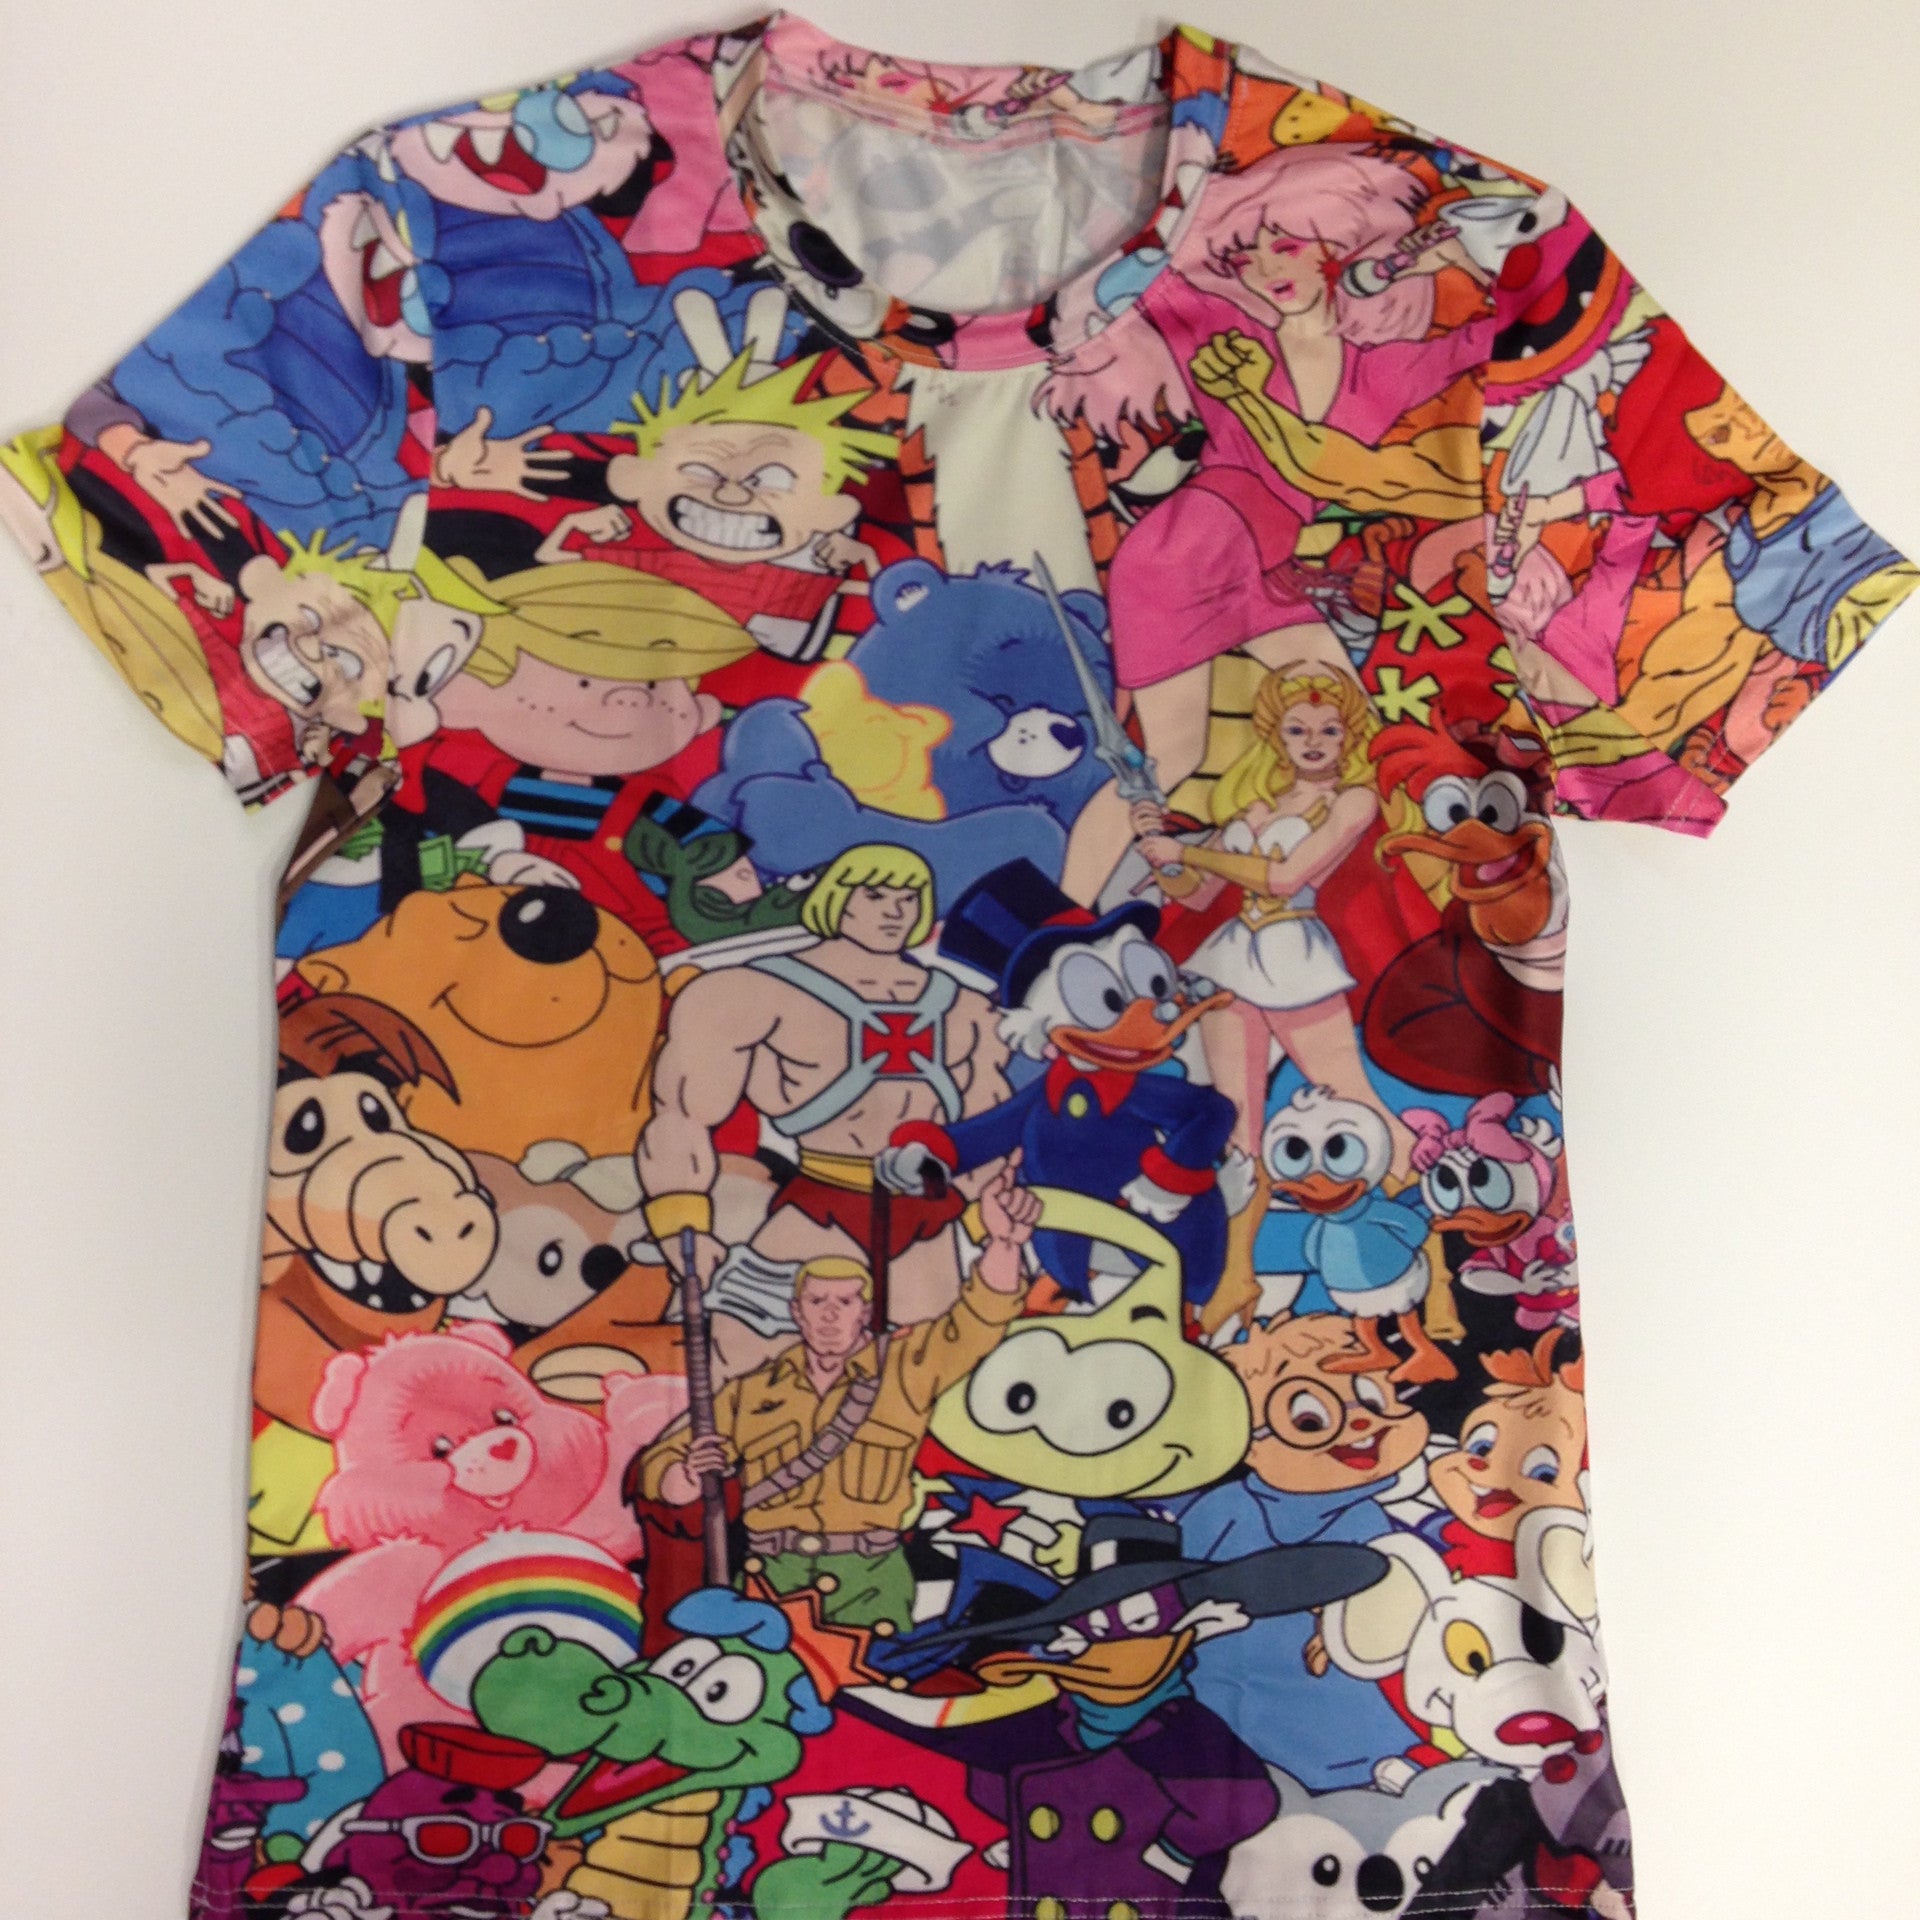 Multi-Character 88% Polyester / 12% Spandex Blend T-Shirt